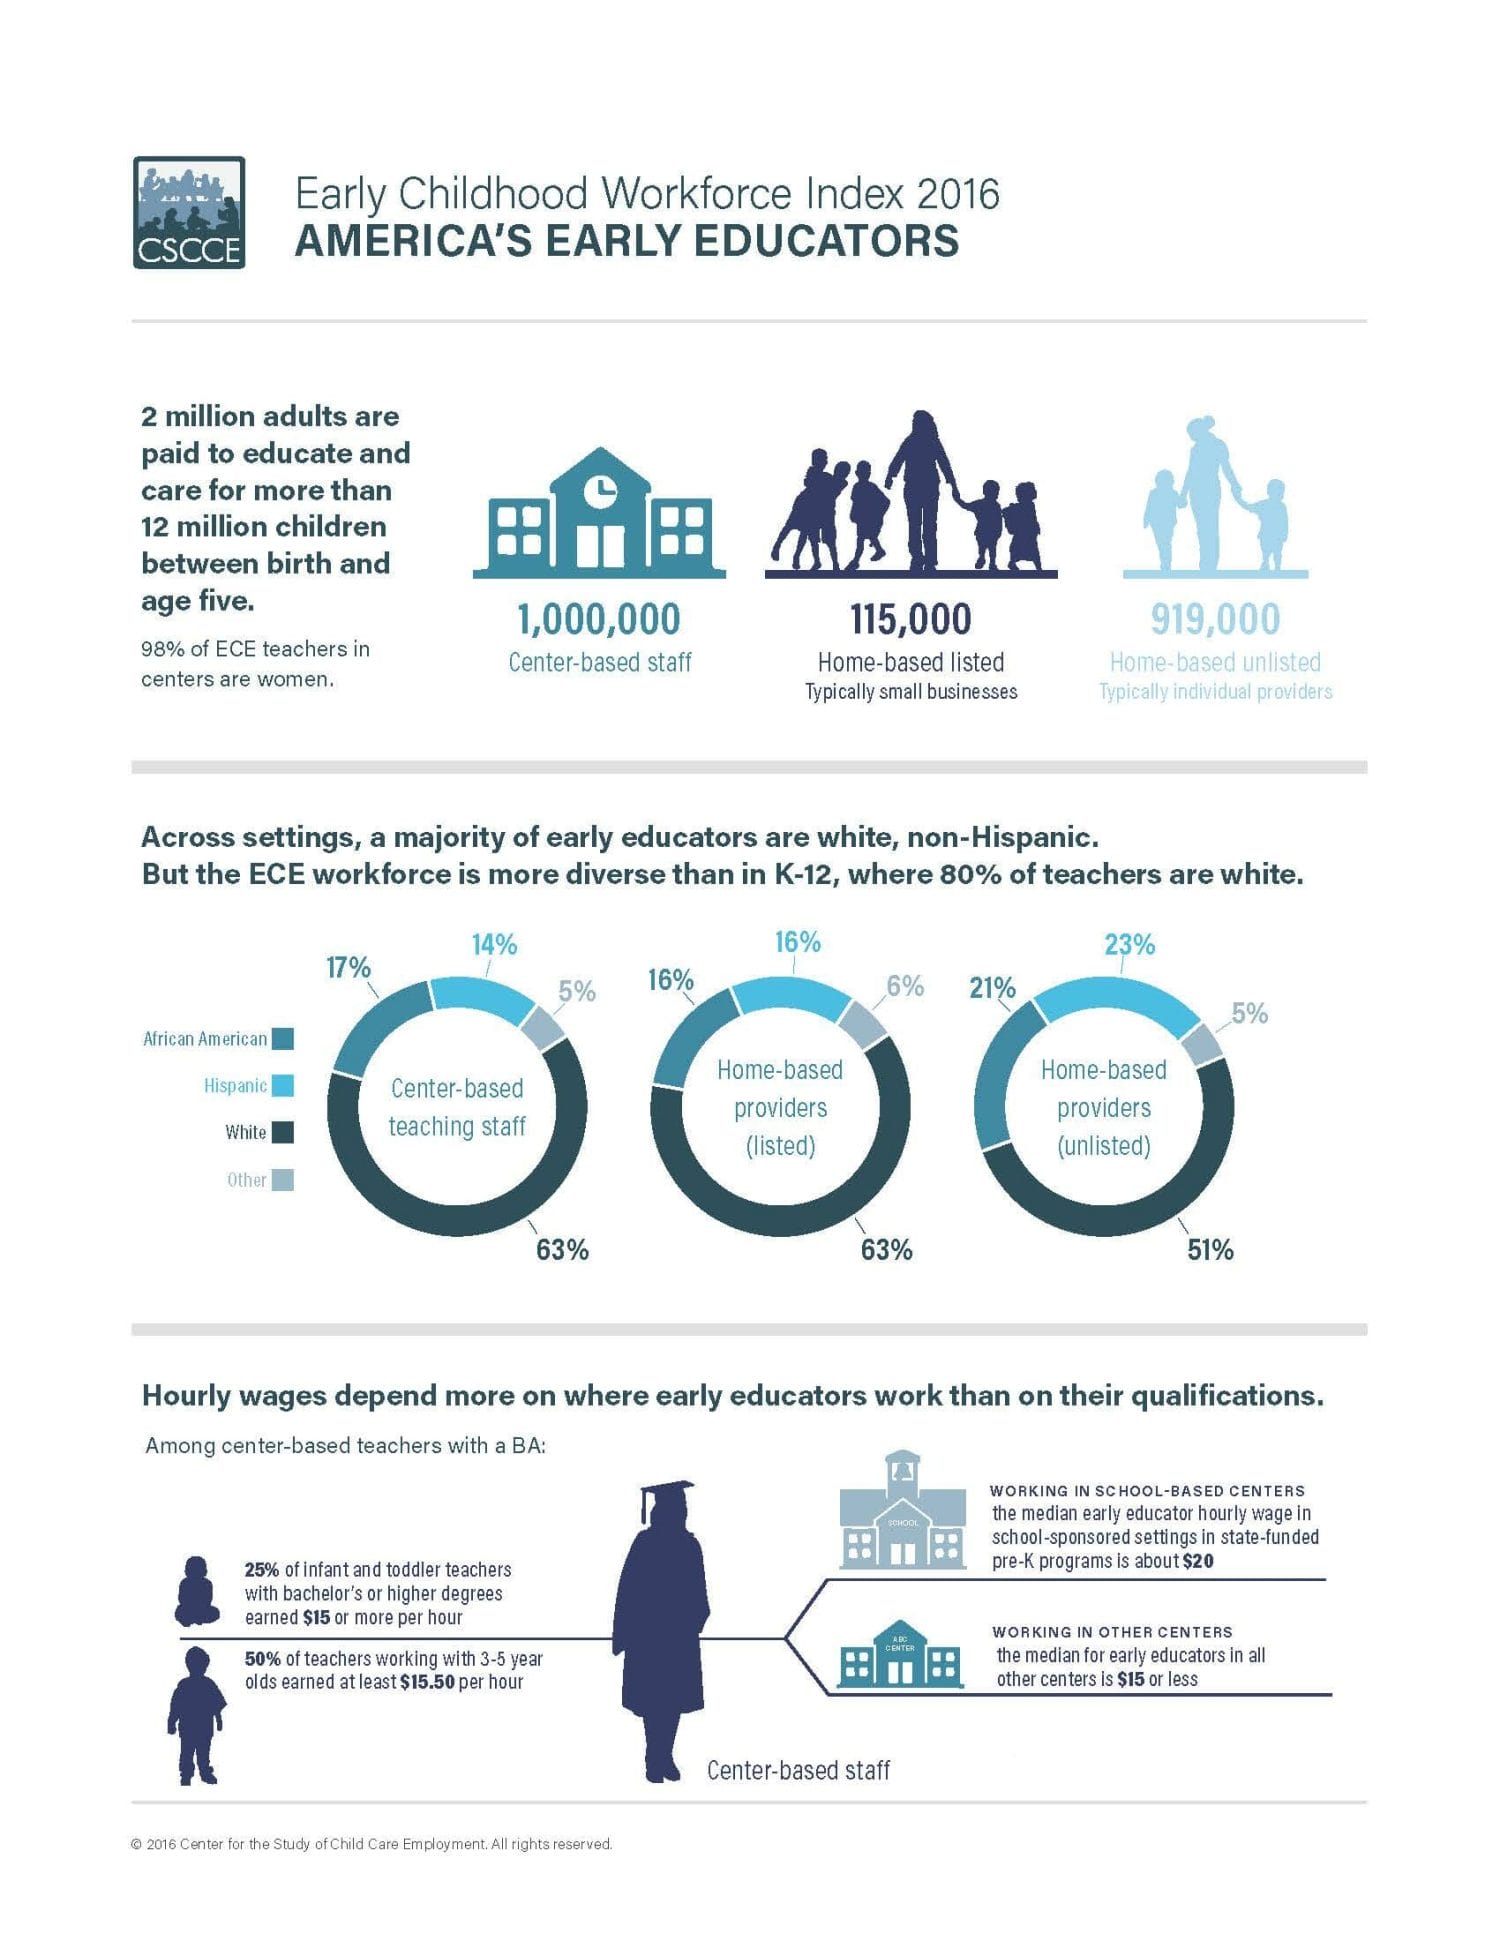 Infographic about the general background information of early childhood educators.